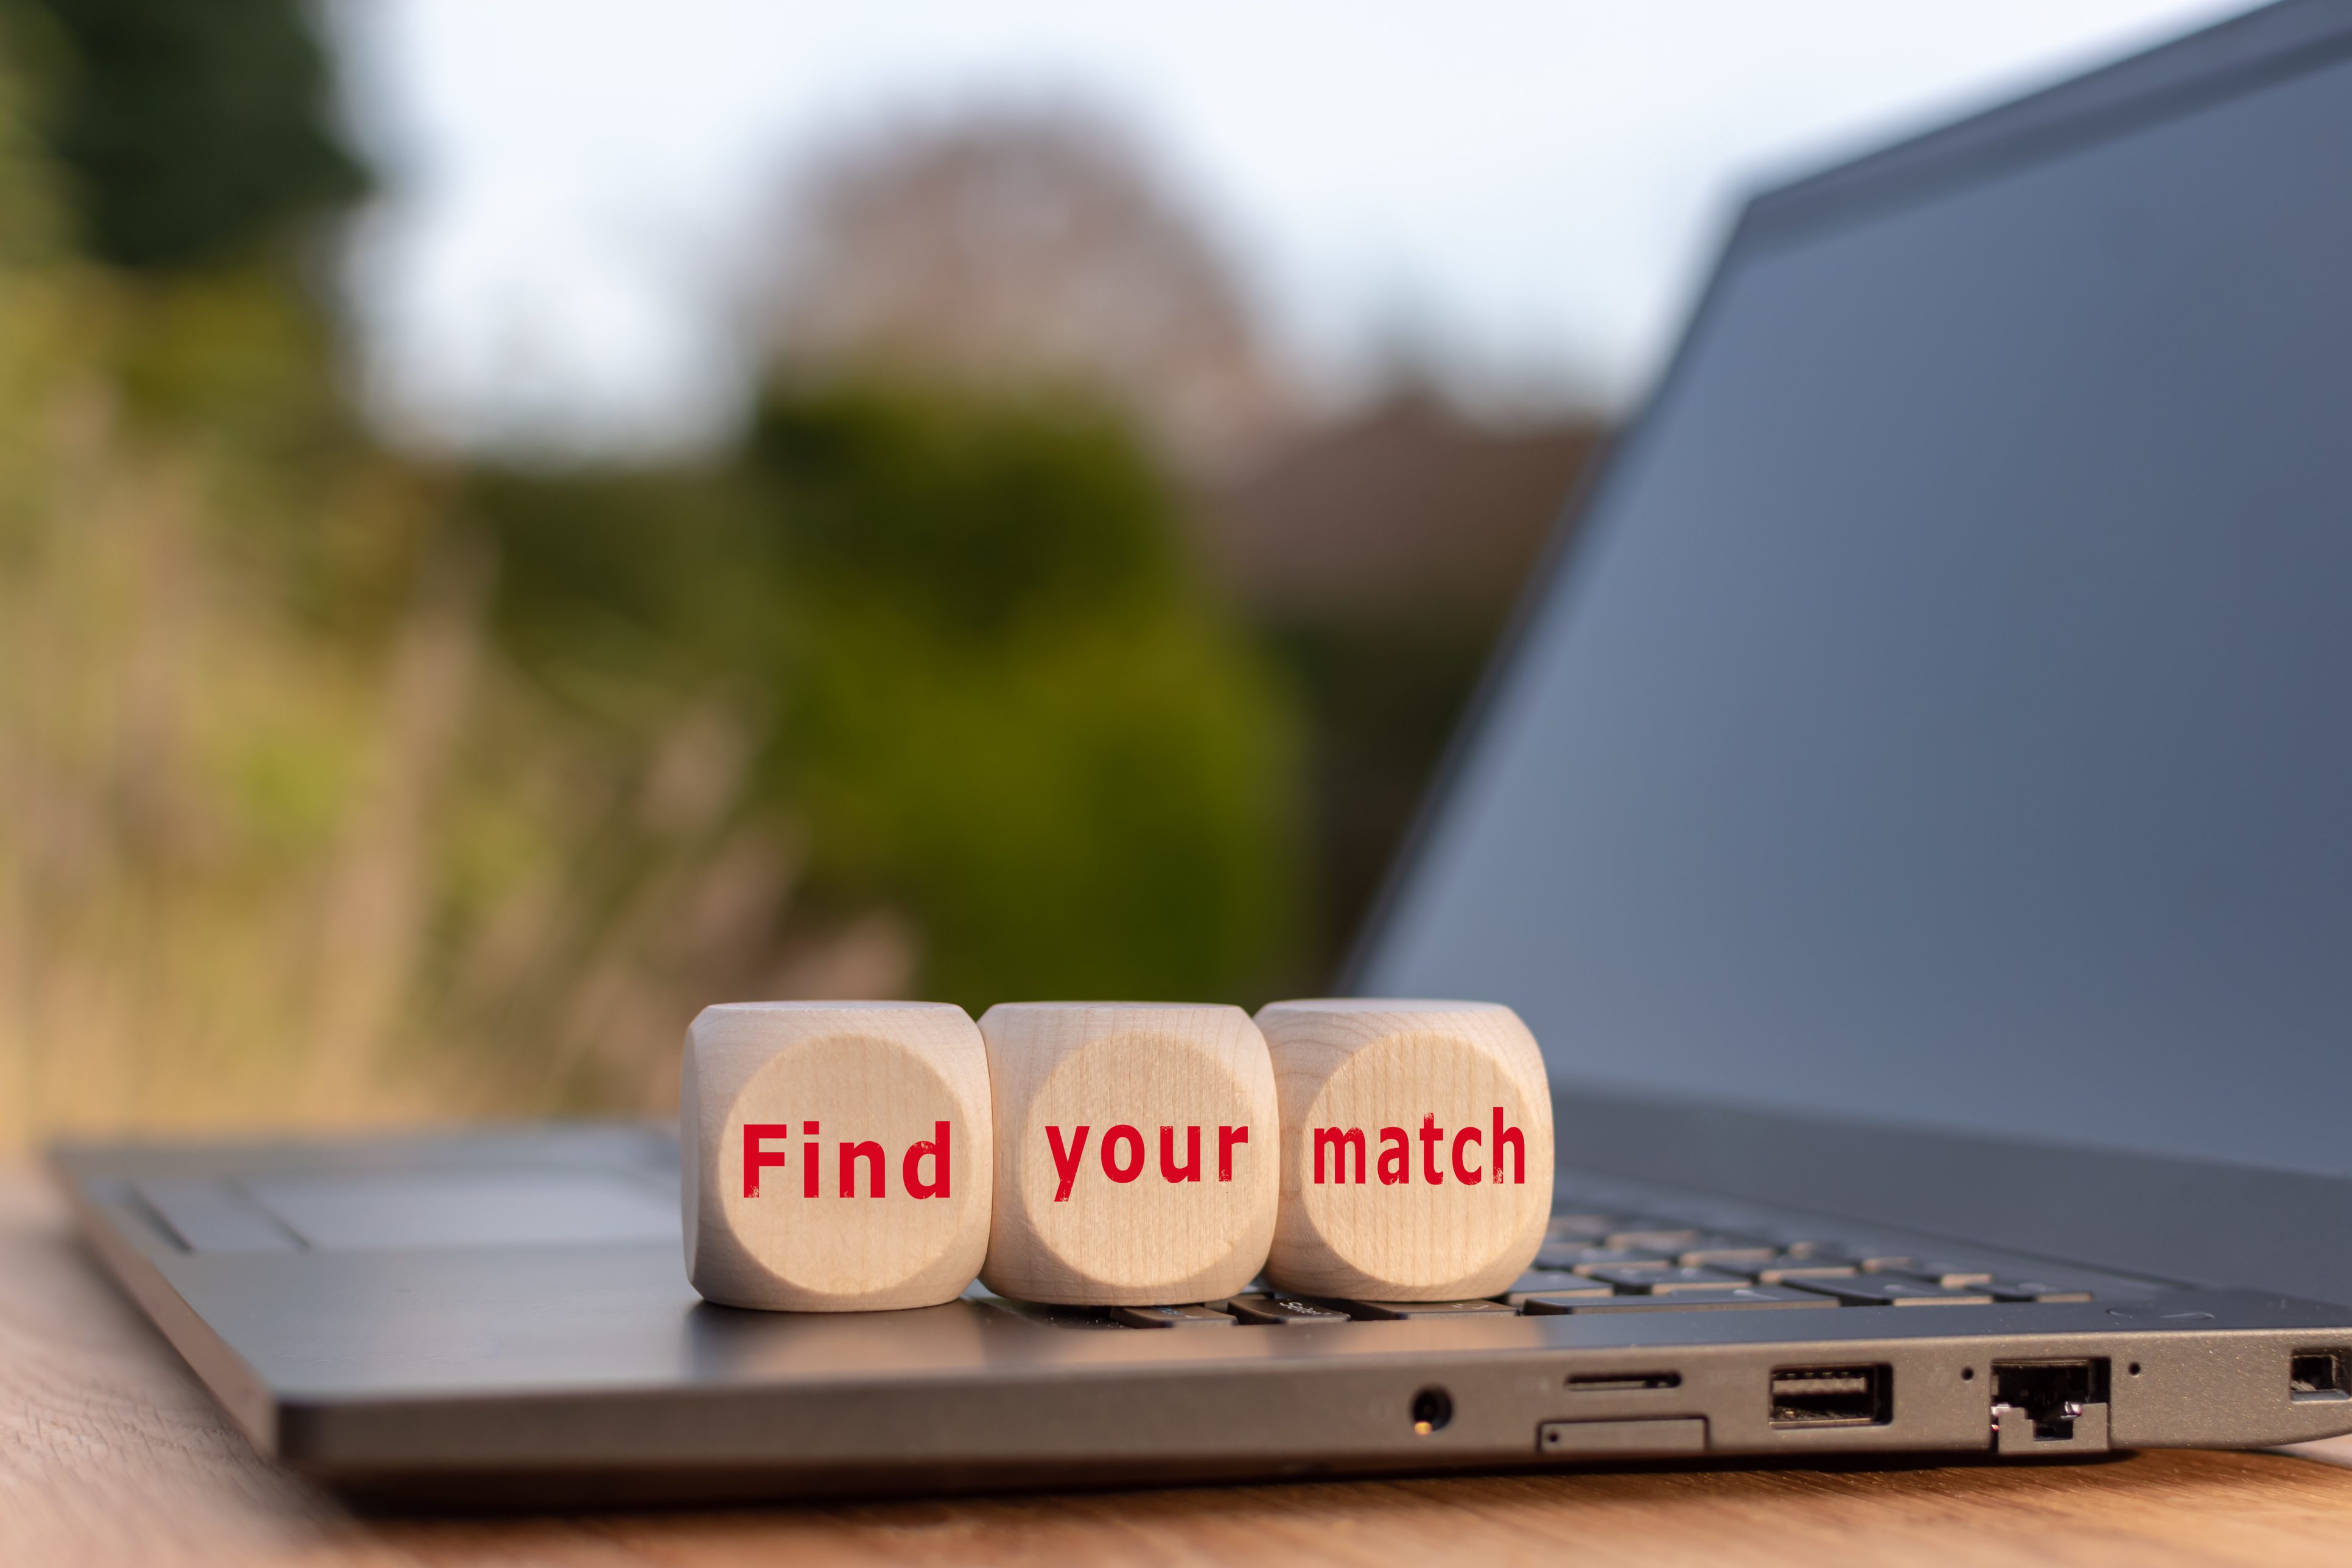 Do You Think Online Dating Would Be Easier Than Asking Out A Girl In Real Life?